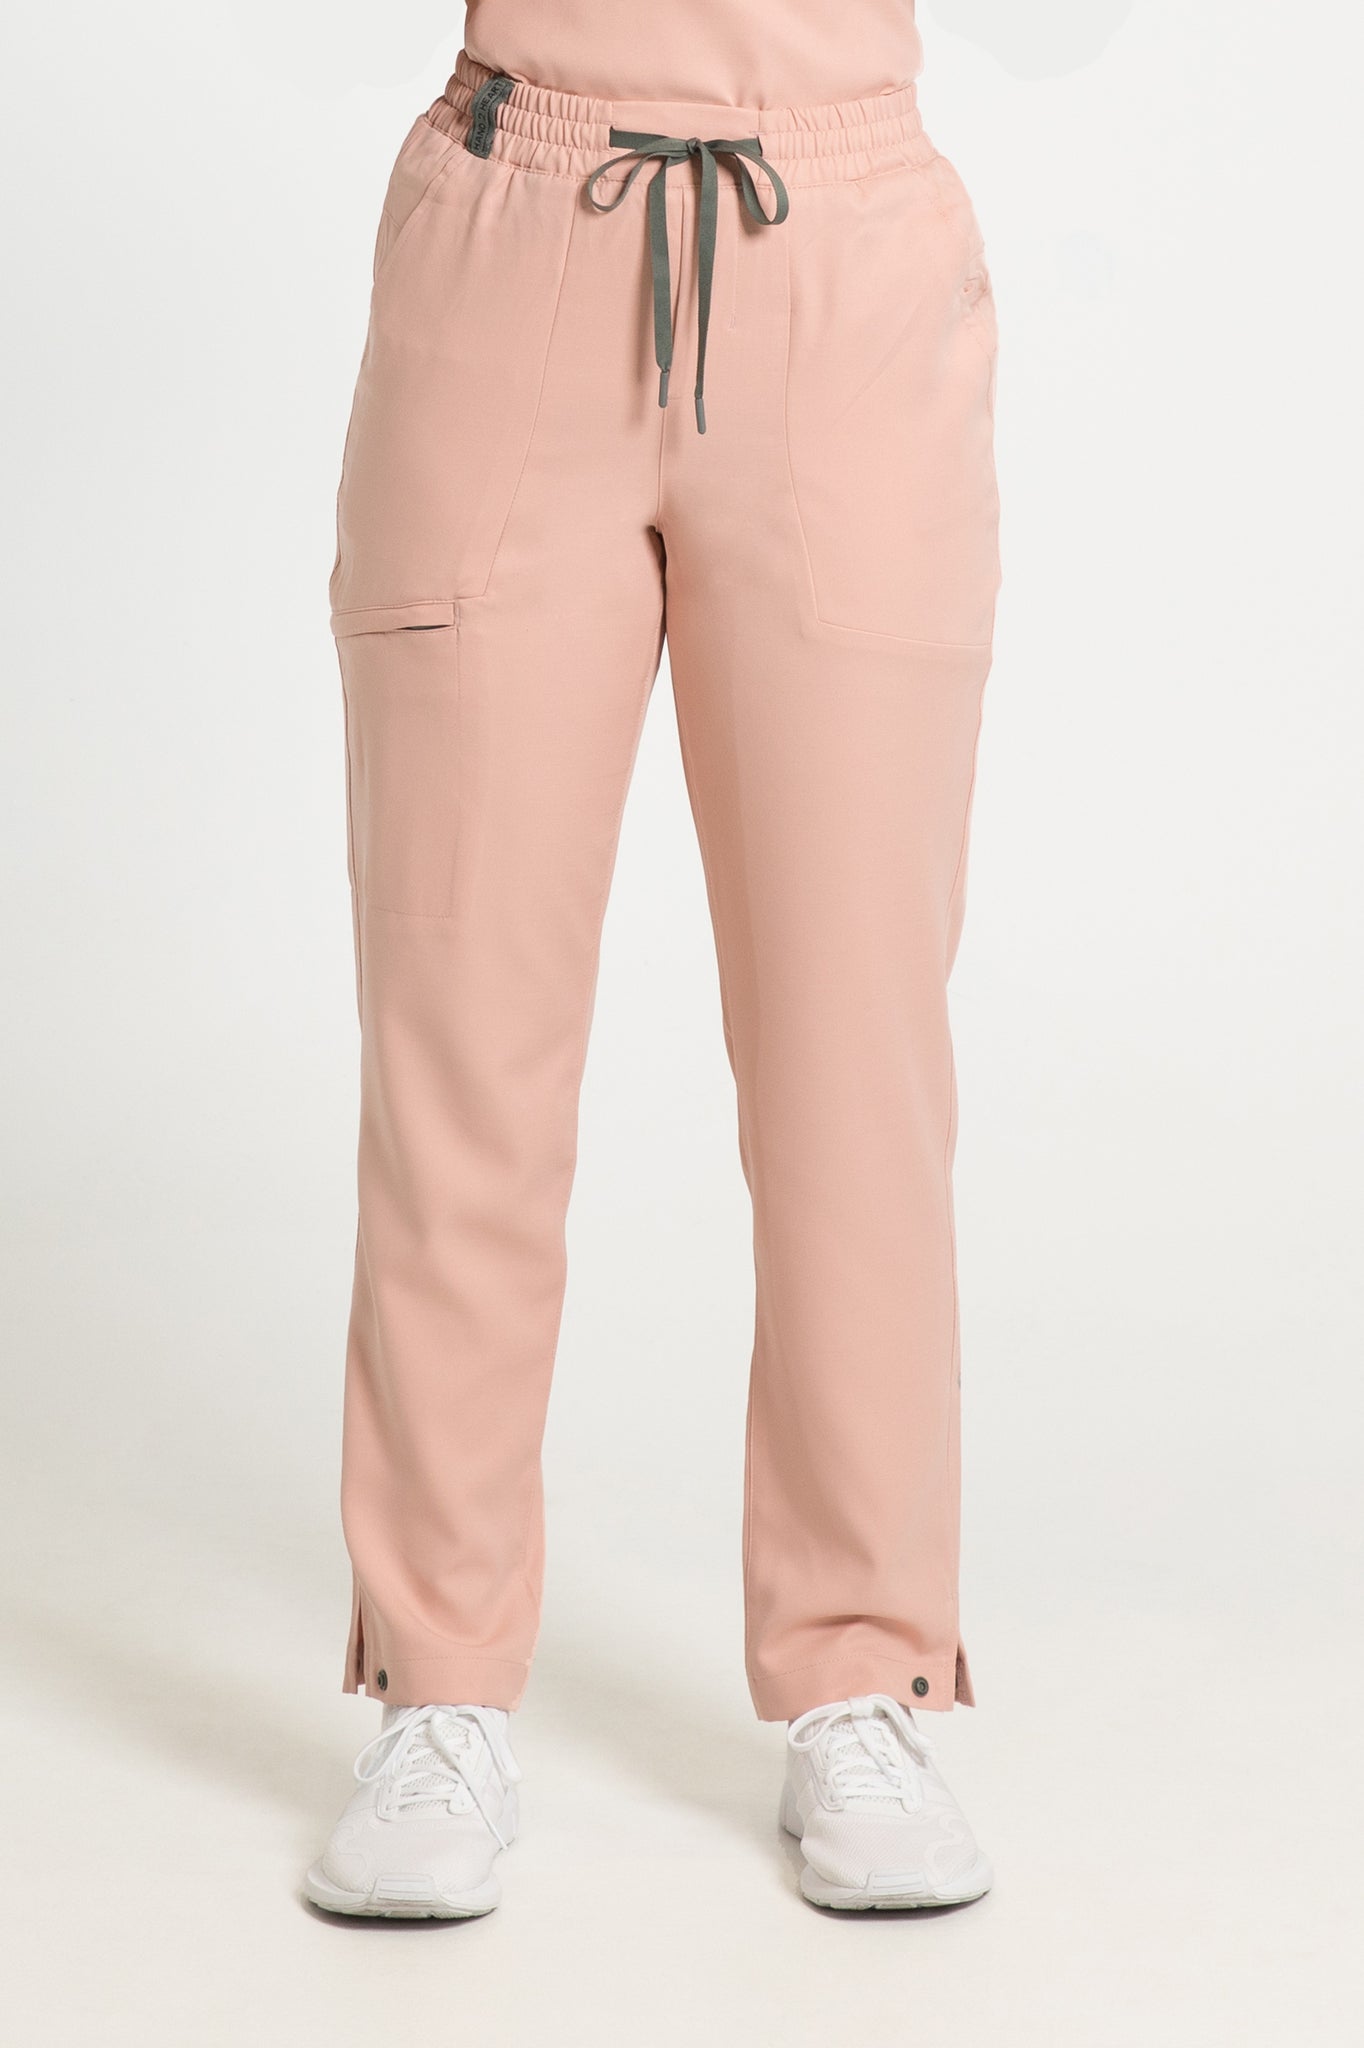 https://sustainable-scrubs.com/cdn/shop/files/The-Cumulus-Scrub-Pants-Womens-Coral-Pink-Hand2Heart-Smart-Sustainable-Scrubs-front-7982copy_2048x2048.jpg?v=1696928994